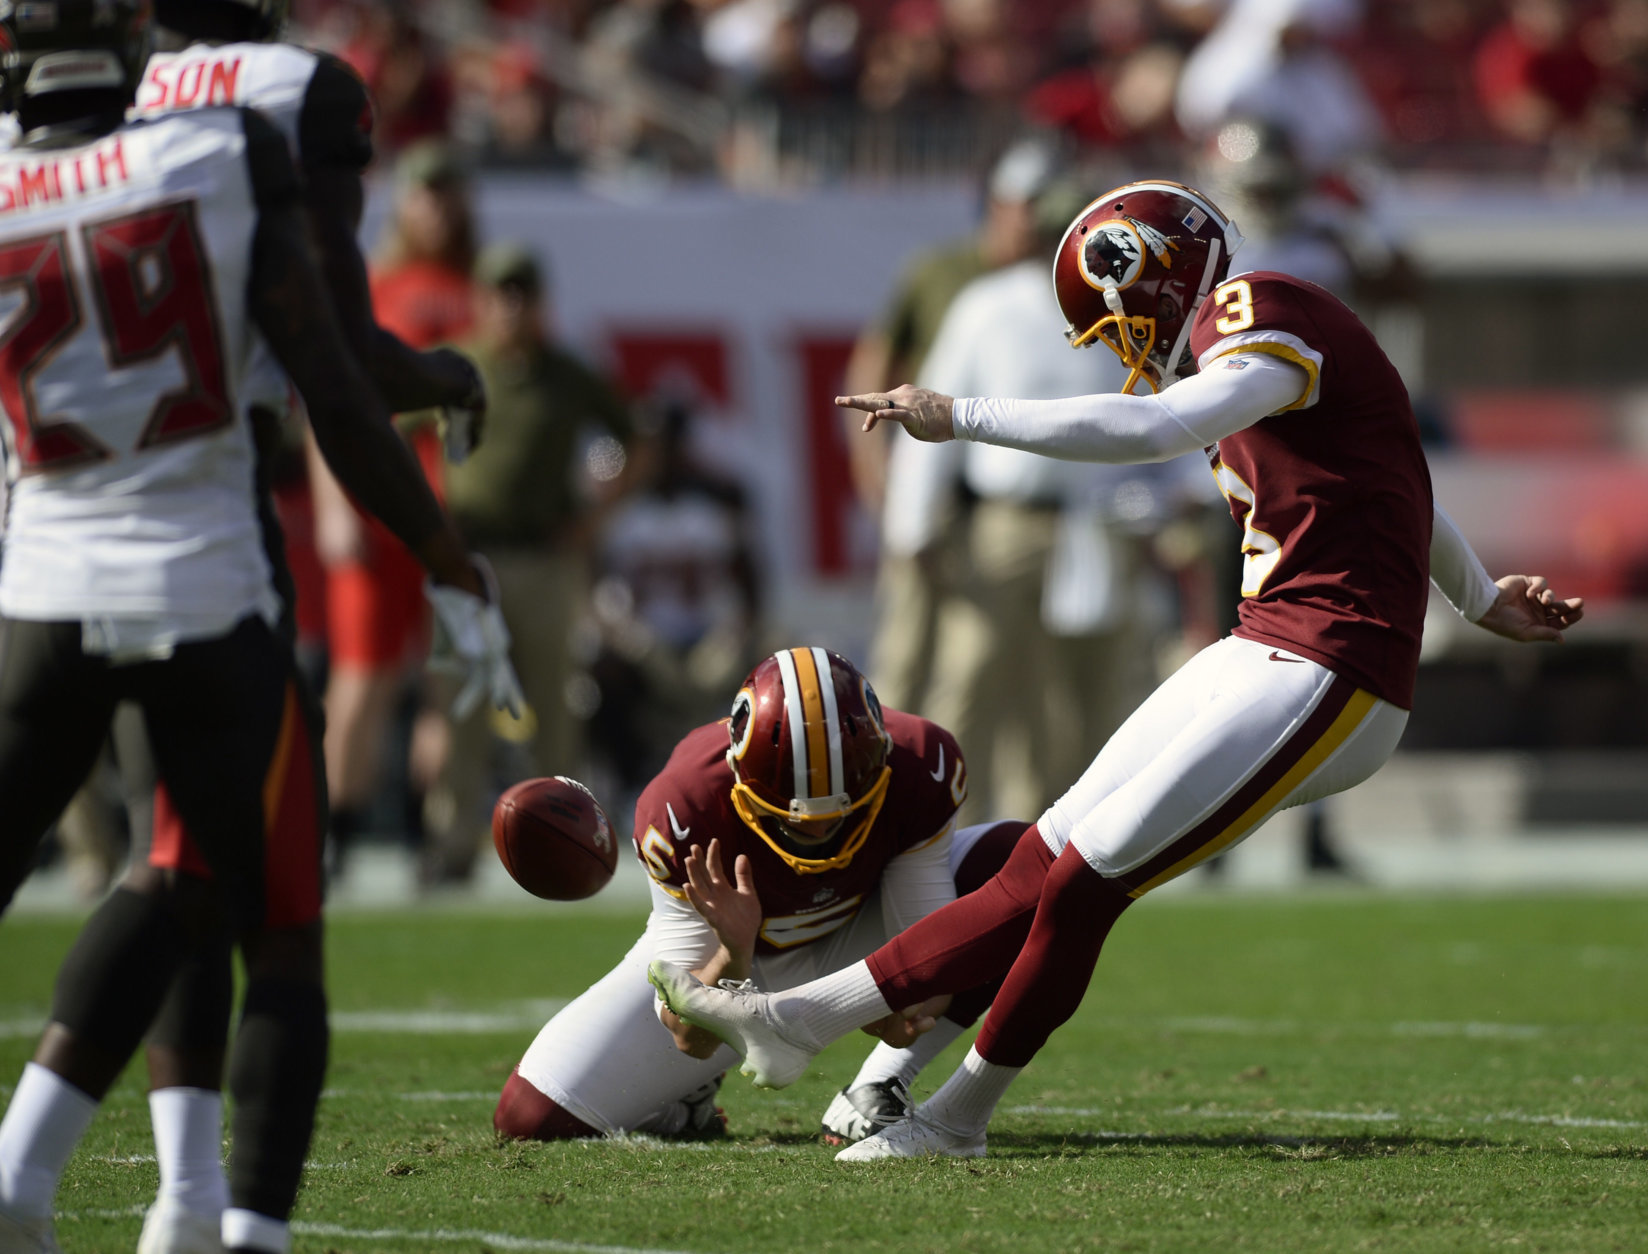 Washington Redskins' Dustin Hopkins (3) kicks a field goal against the Tampa Bay Buccaneers during the first half of an NFL football game Sunday, Nov. 11, 2018, in Tampa, Fla. (AP Photo/Jason Behnken)